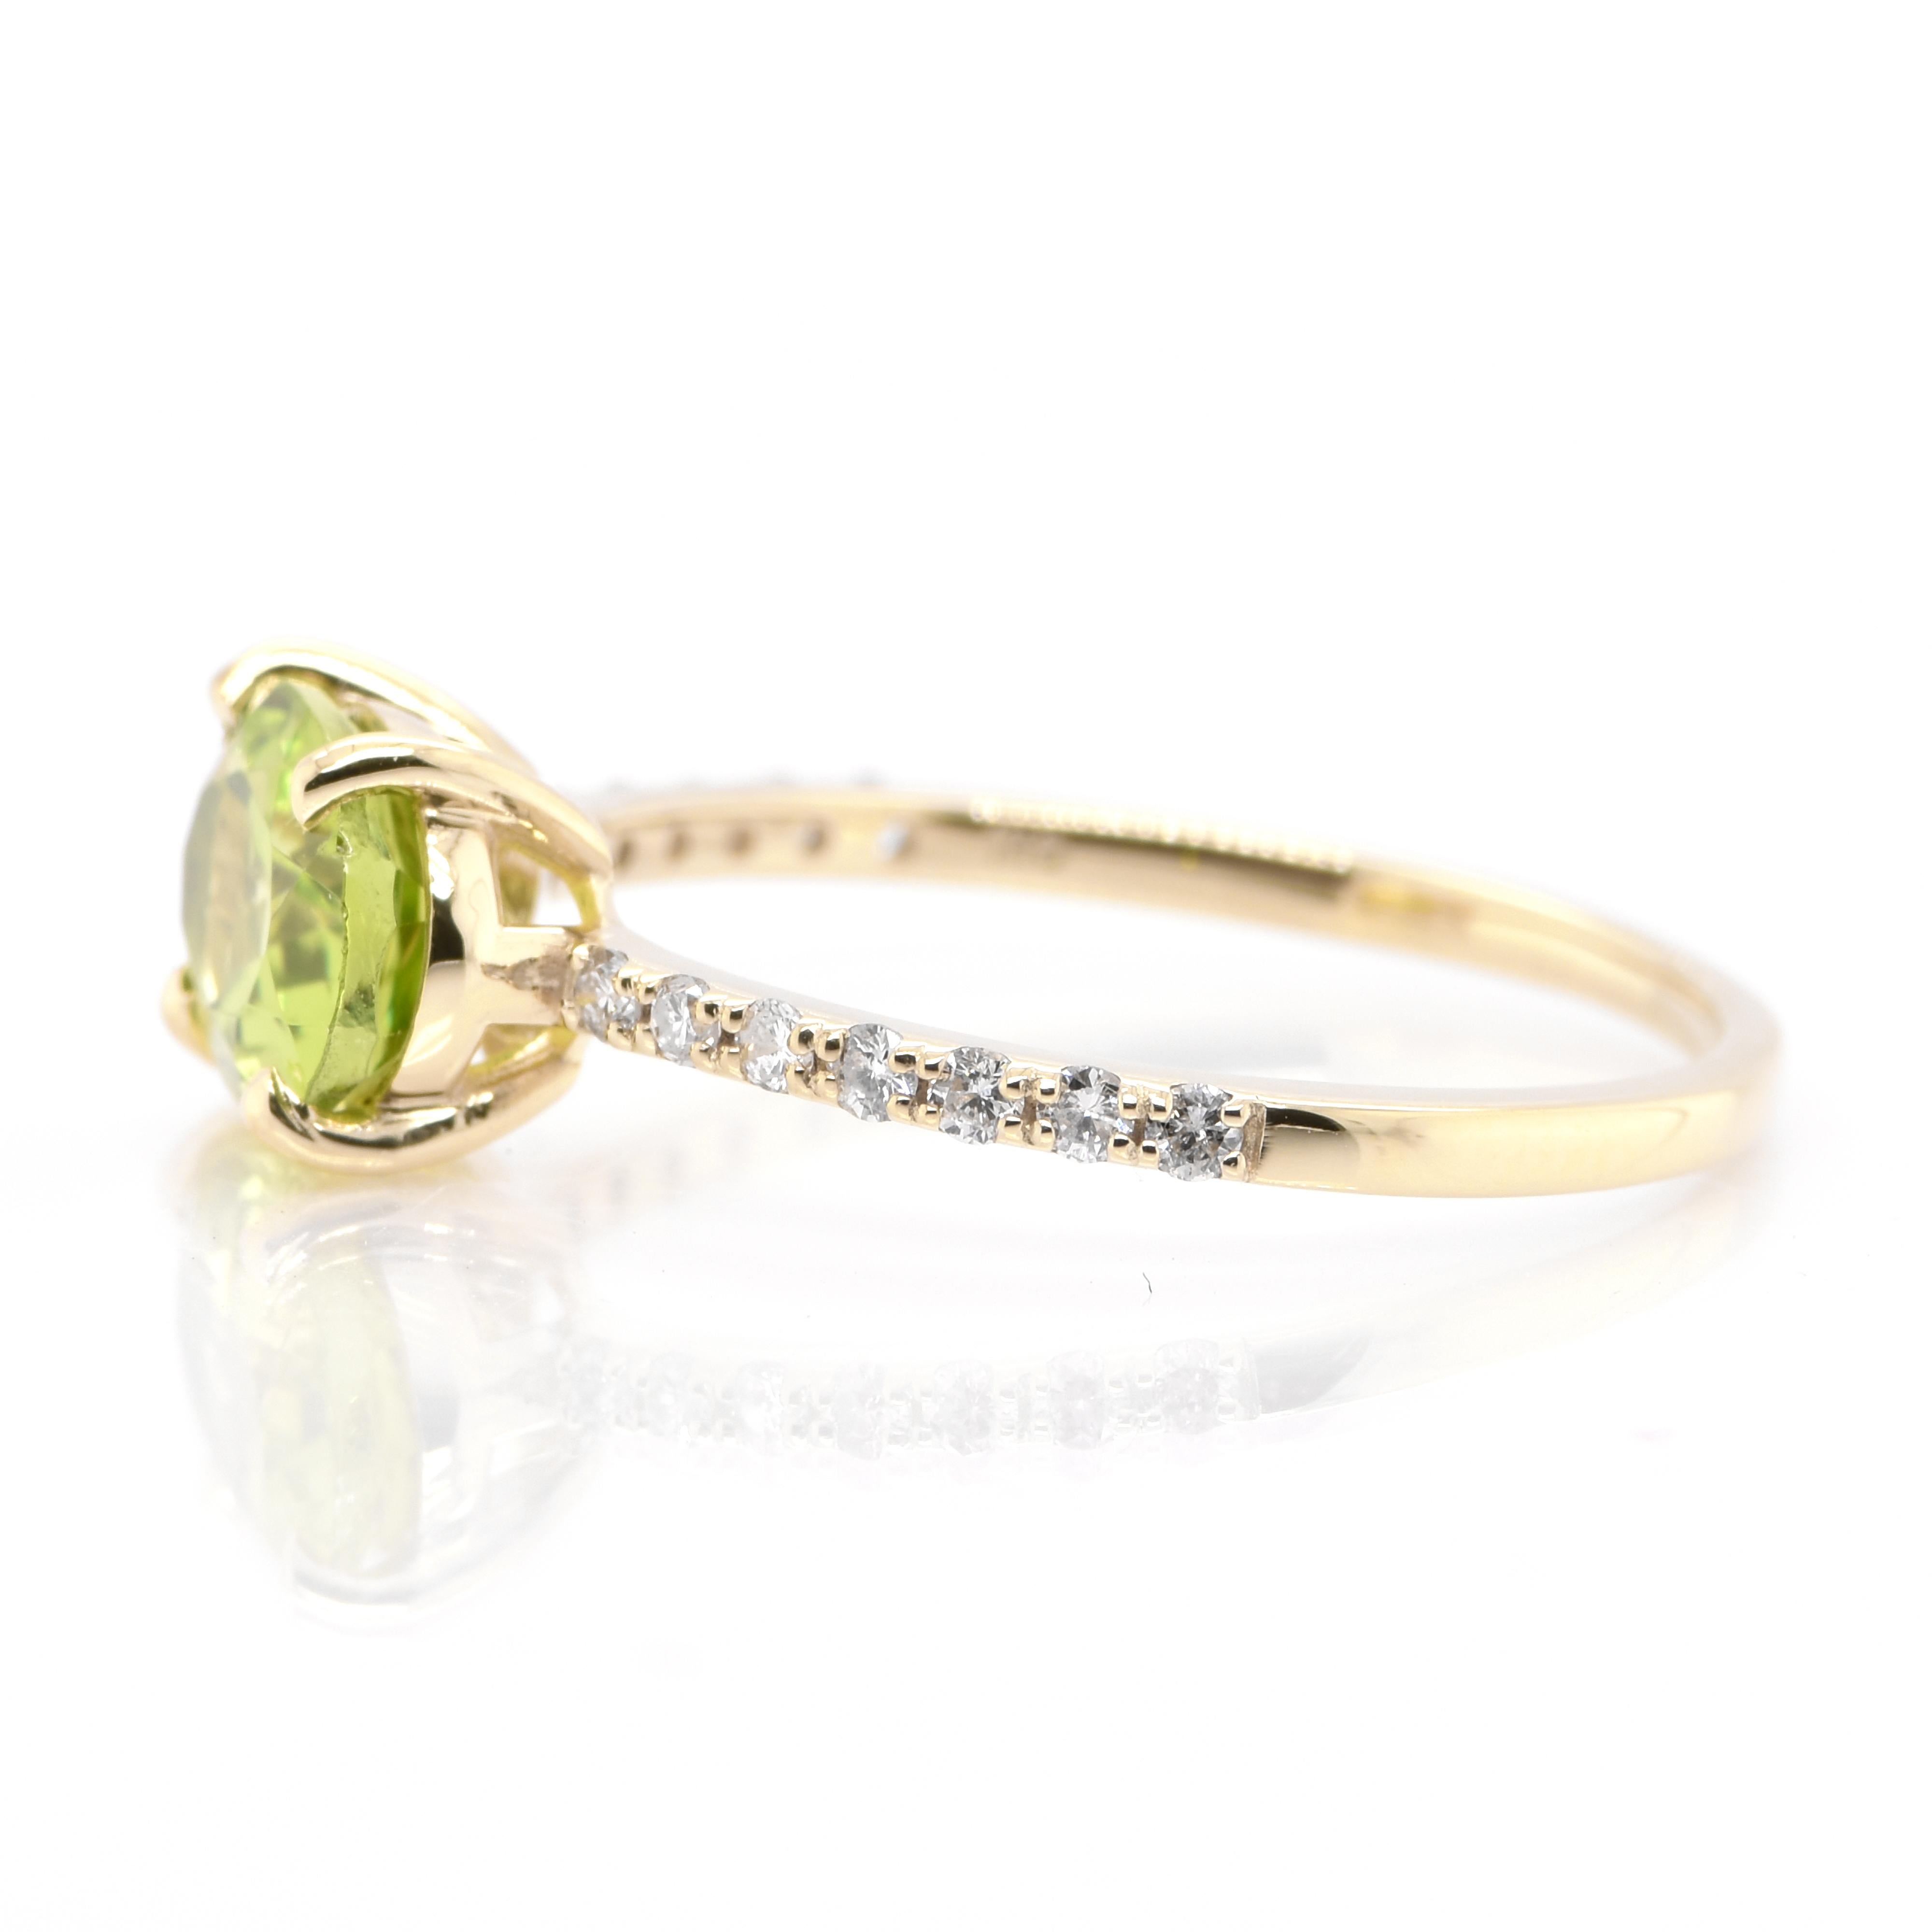 Oval Cut 1.46 Carat Natural Peridot and Diamond Ring Set in 18 Karat Gold For Sale